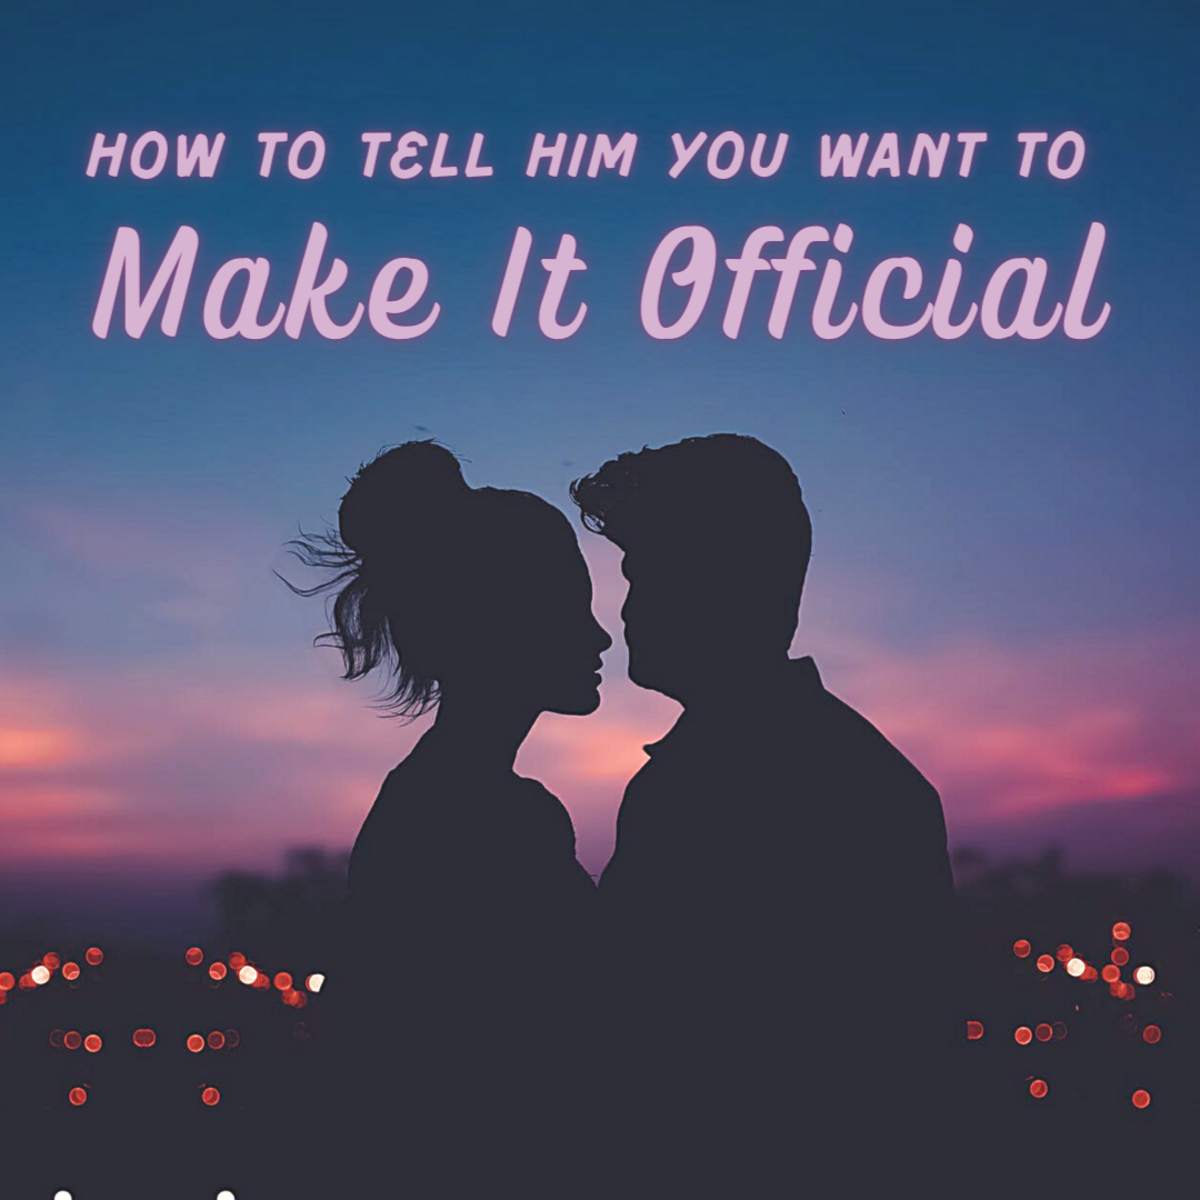 How do you tell him you're ready to make your relationship official? Read on to find out!